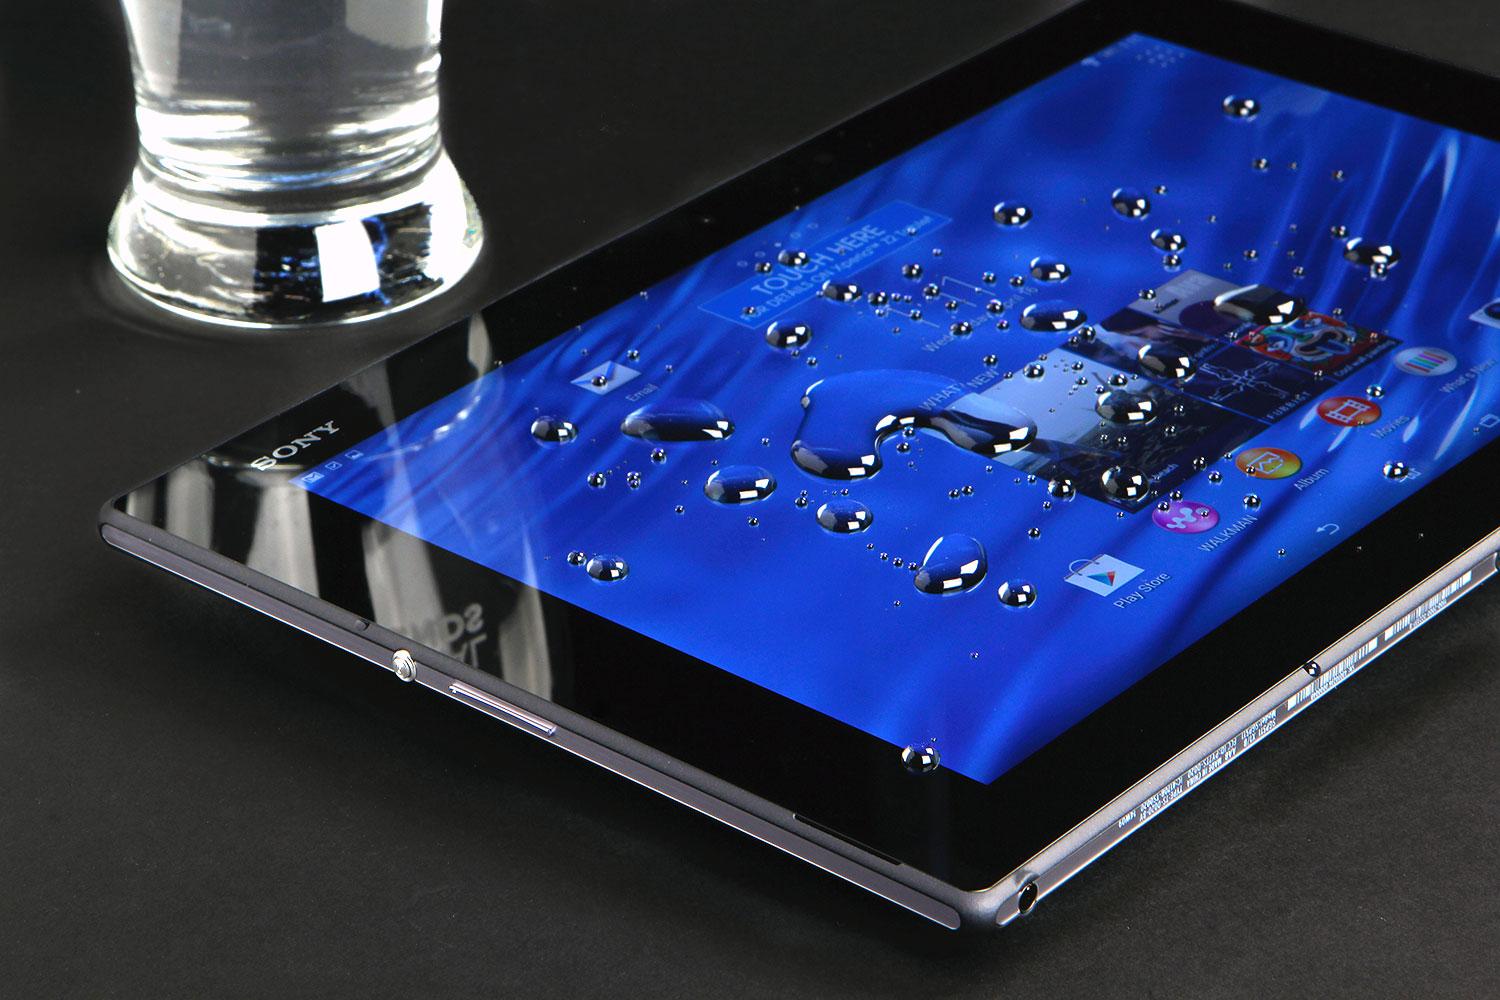 Xperia Z2 Tablet Review: The Best 10.1-inch Android Tablet 